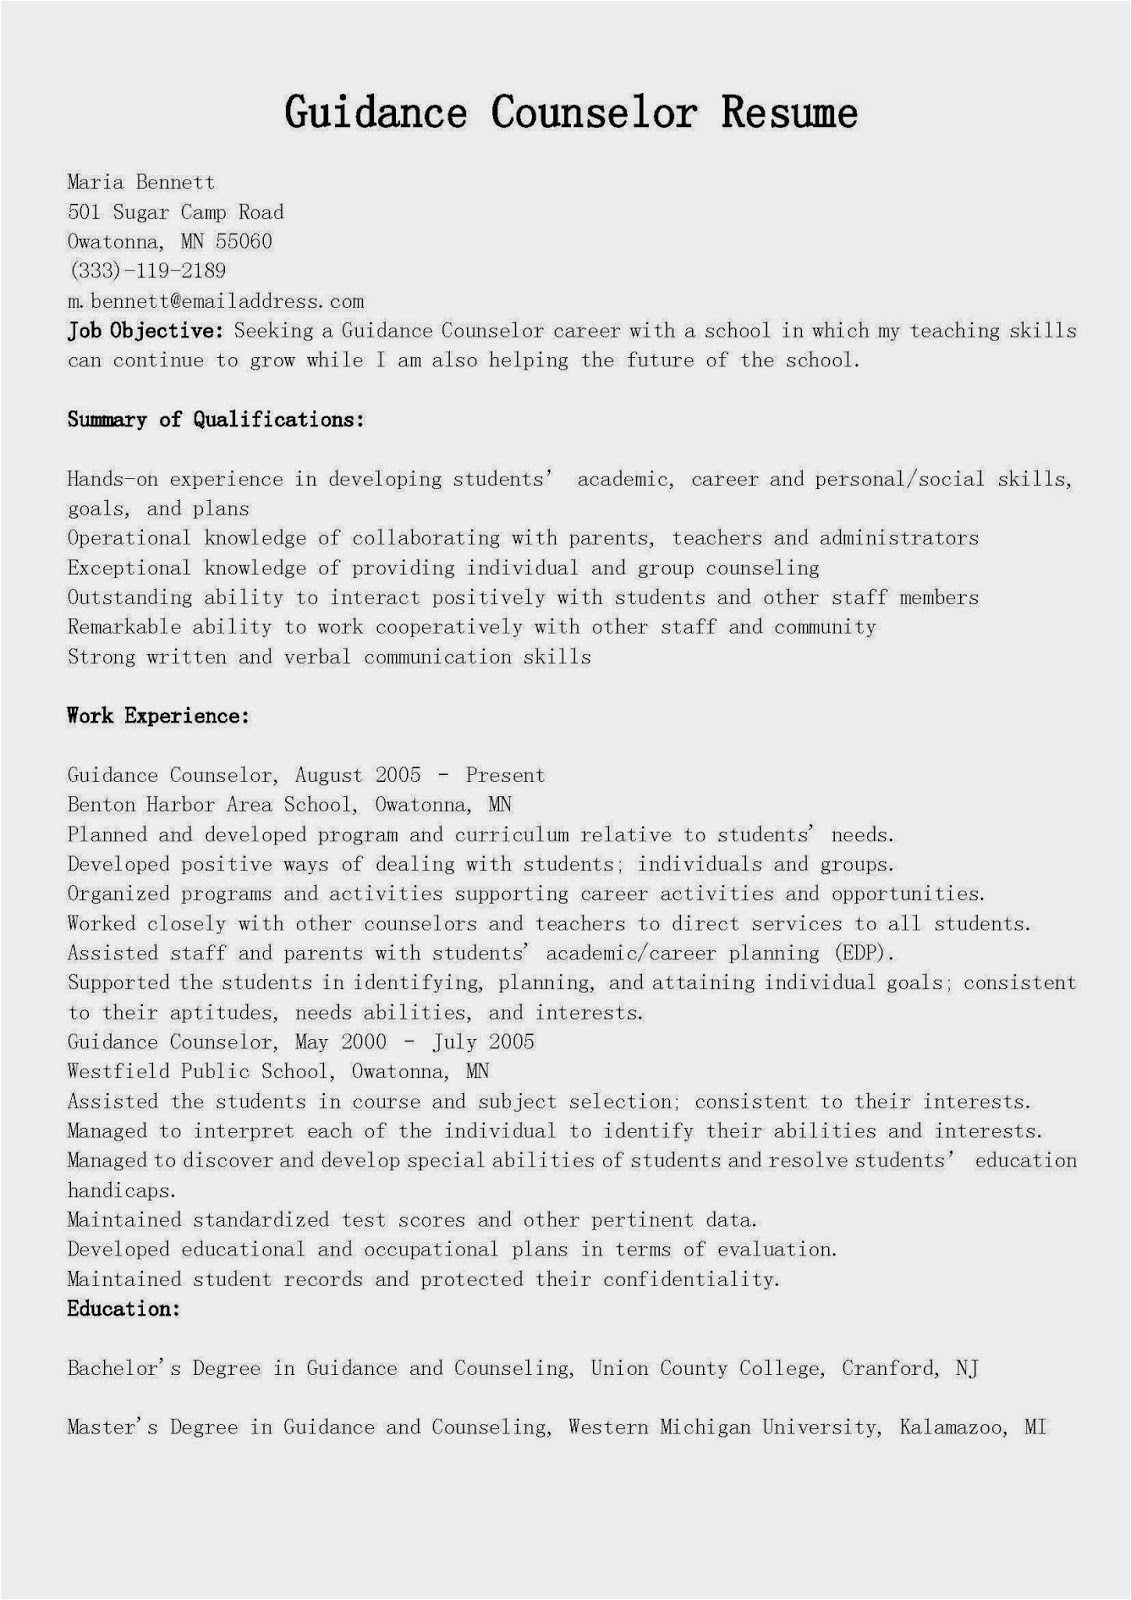 Sample Resume for College Counselor Position Resume Samples Guidance Counselor Resume Sample